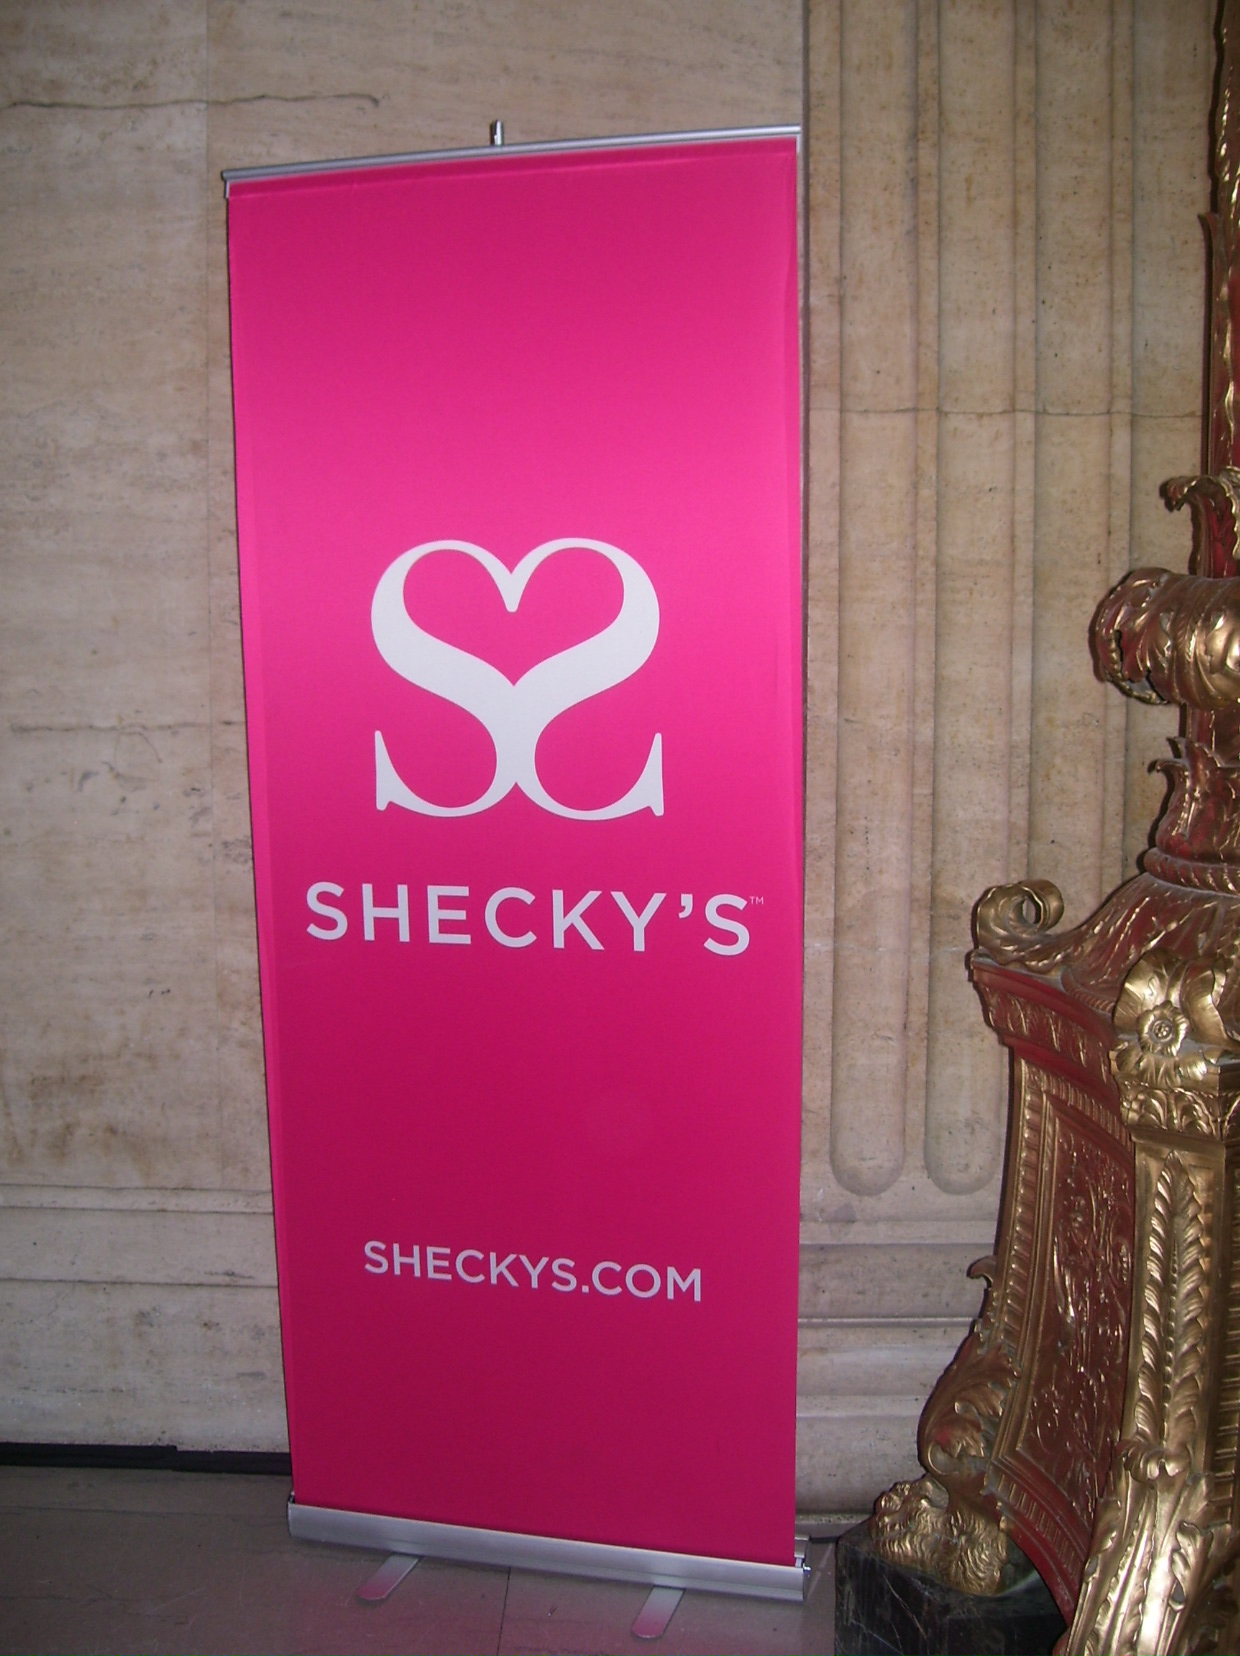 Shecky’s Girls Night Out Chicago for Fall 2011